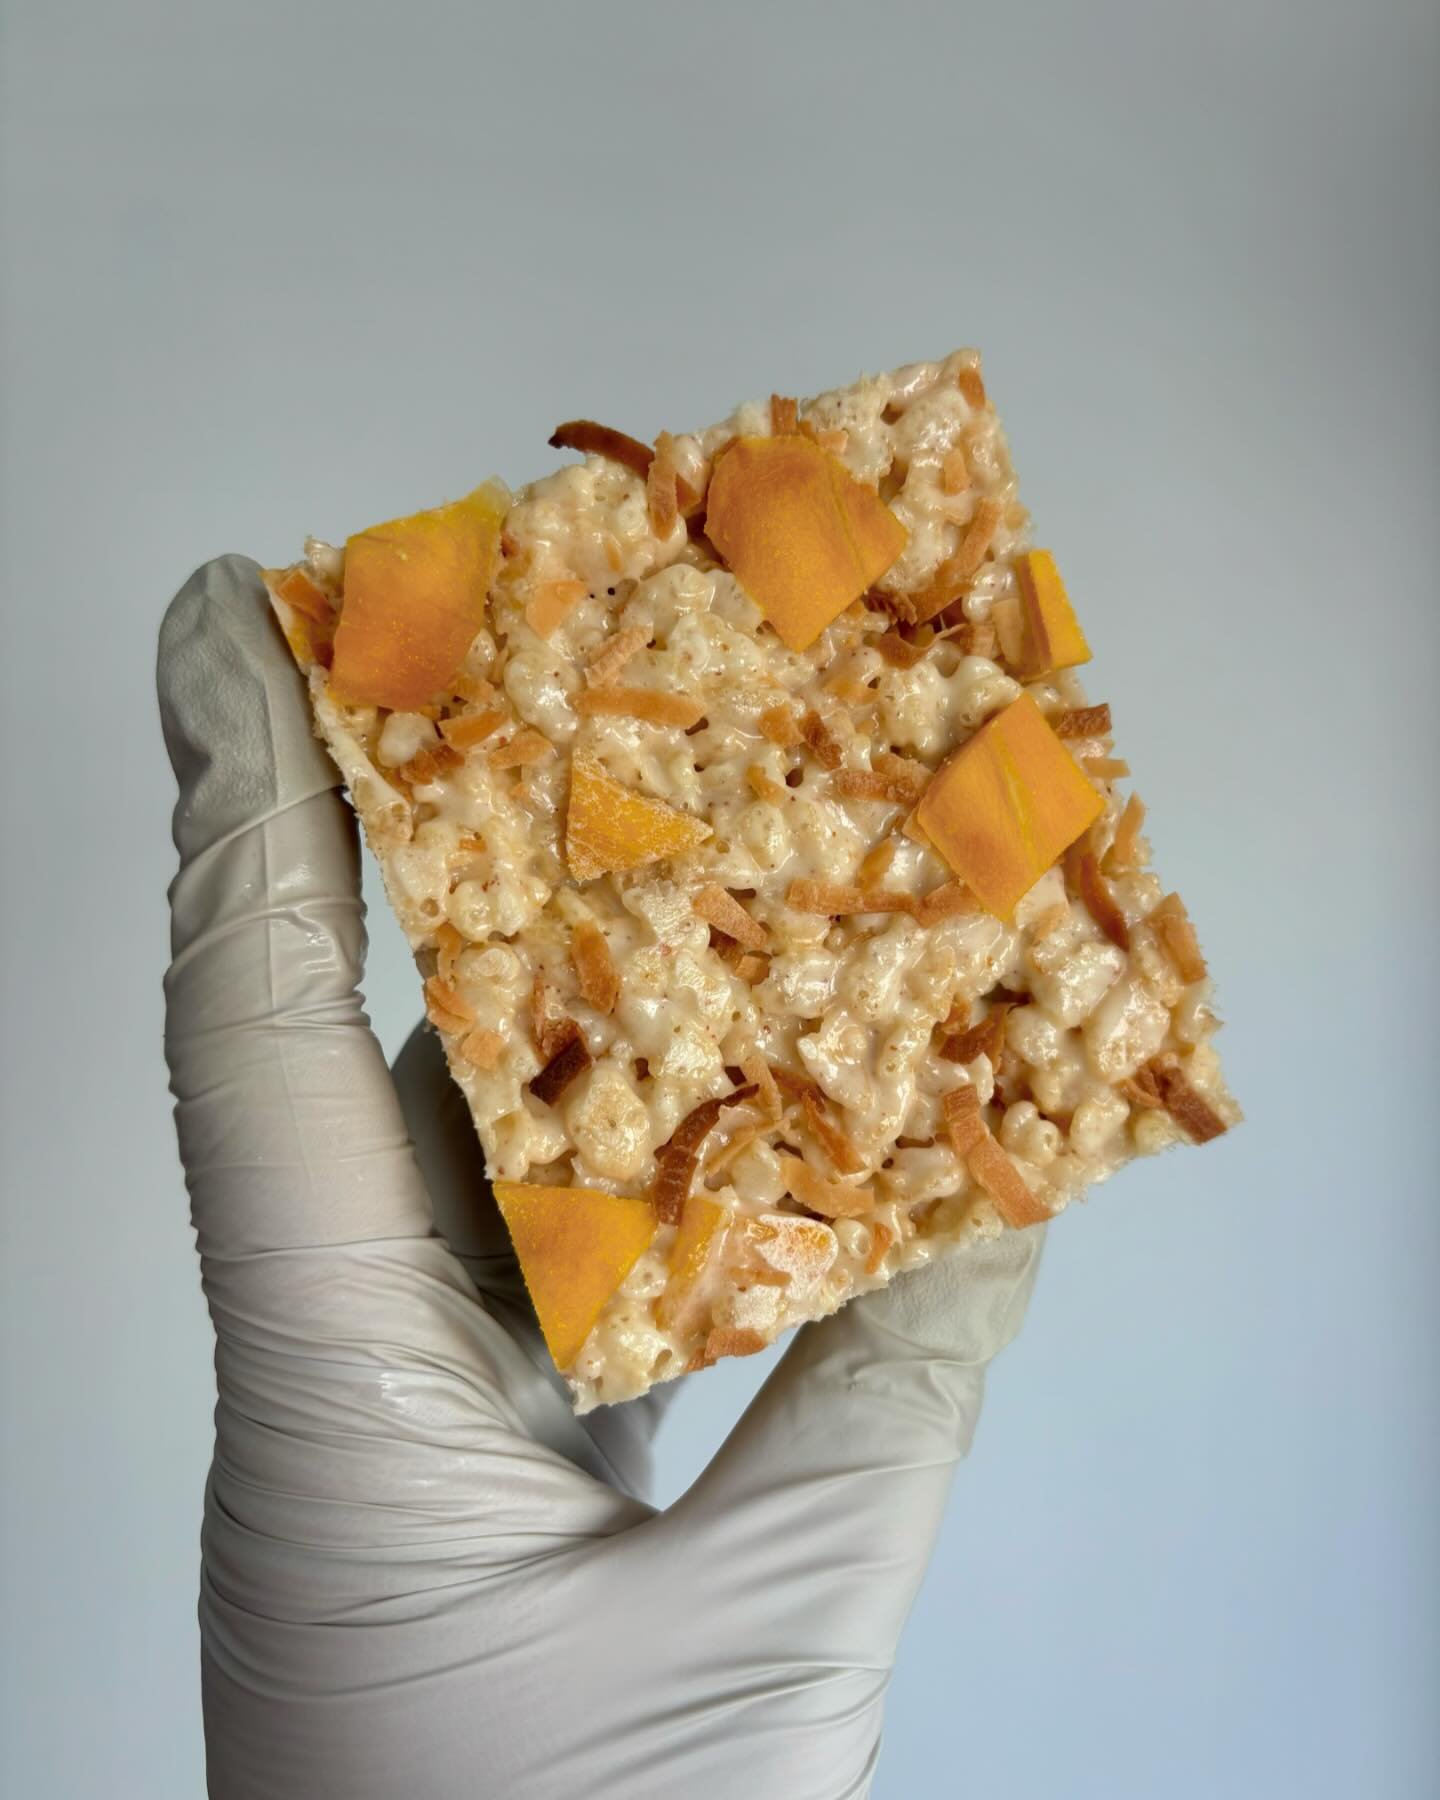 Mango sticky rice rice crispy treat 🥭🍚

Who knew a fruity rice crispy treat would be such a hit?! Creamy coconut marshmallow, aromatic brown butter, fruity and plump dried mango pieces, and delightfully toasty coconut flakes 🤩

You guys are really